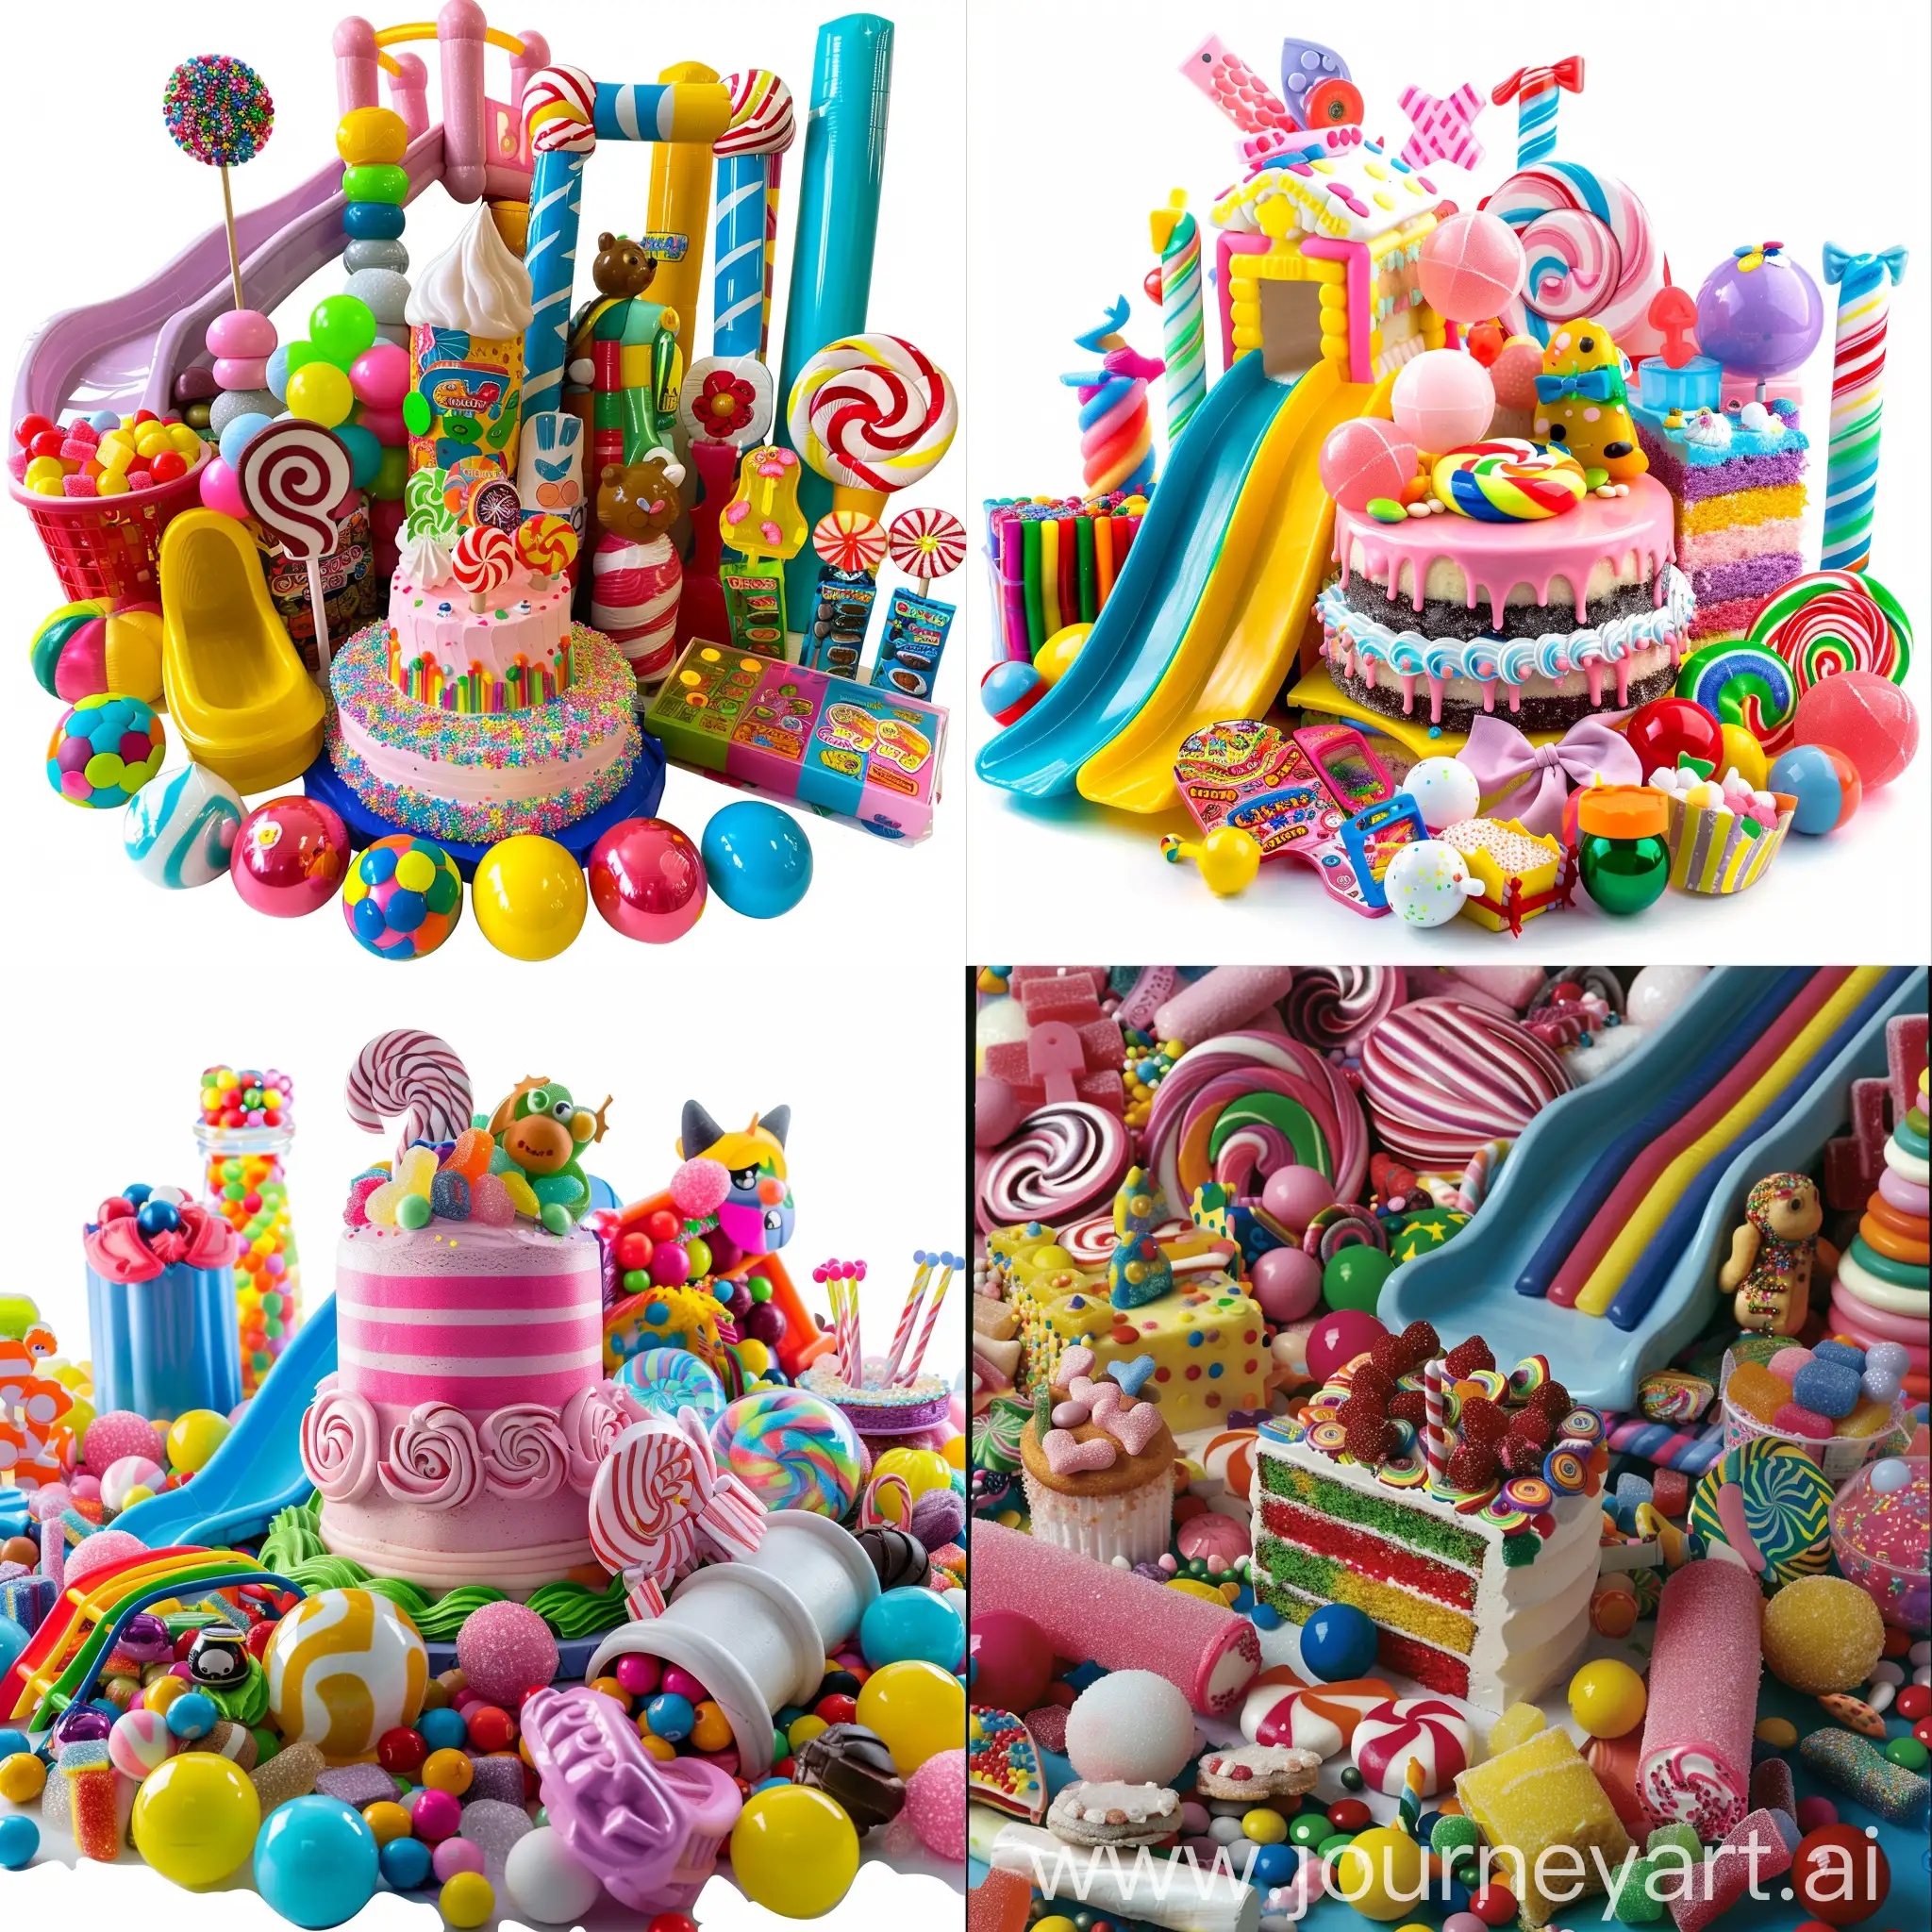 A pile of cool things for kids. Candy cake, games, balls, slide, bicicle etc.